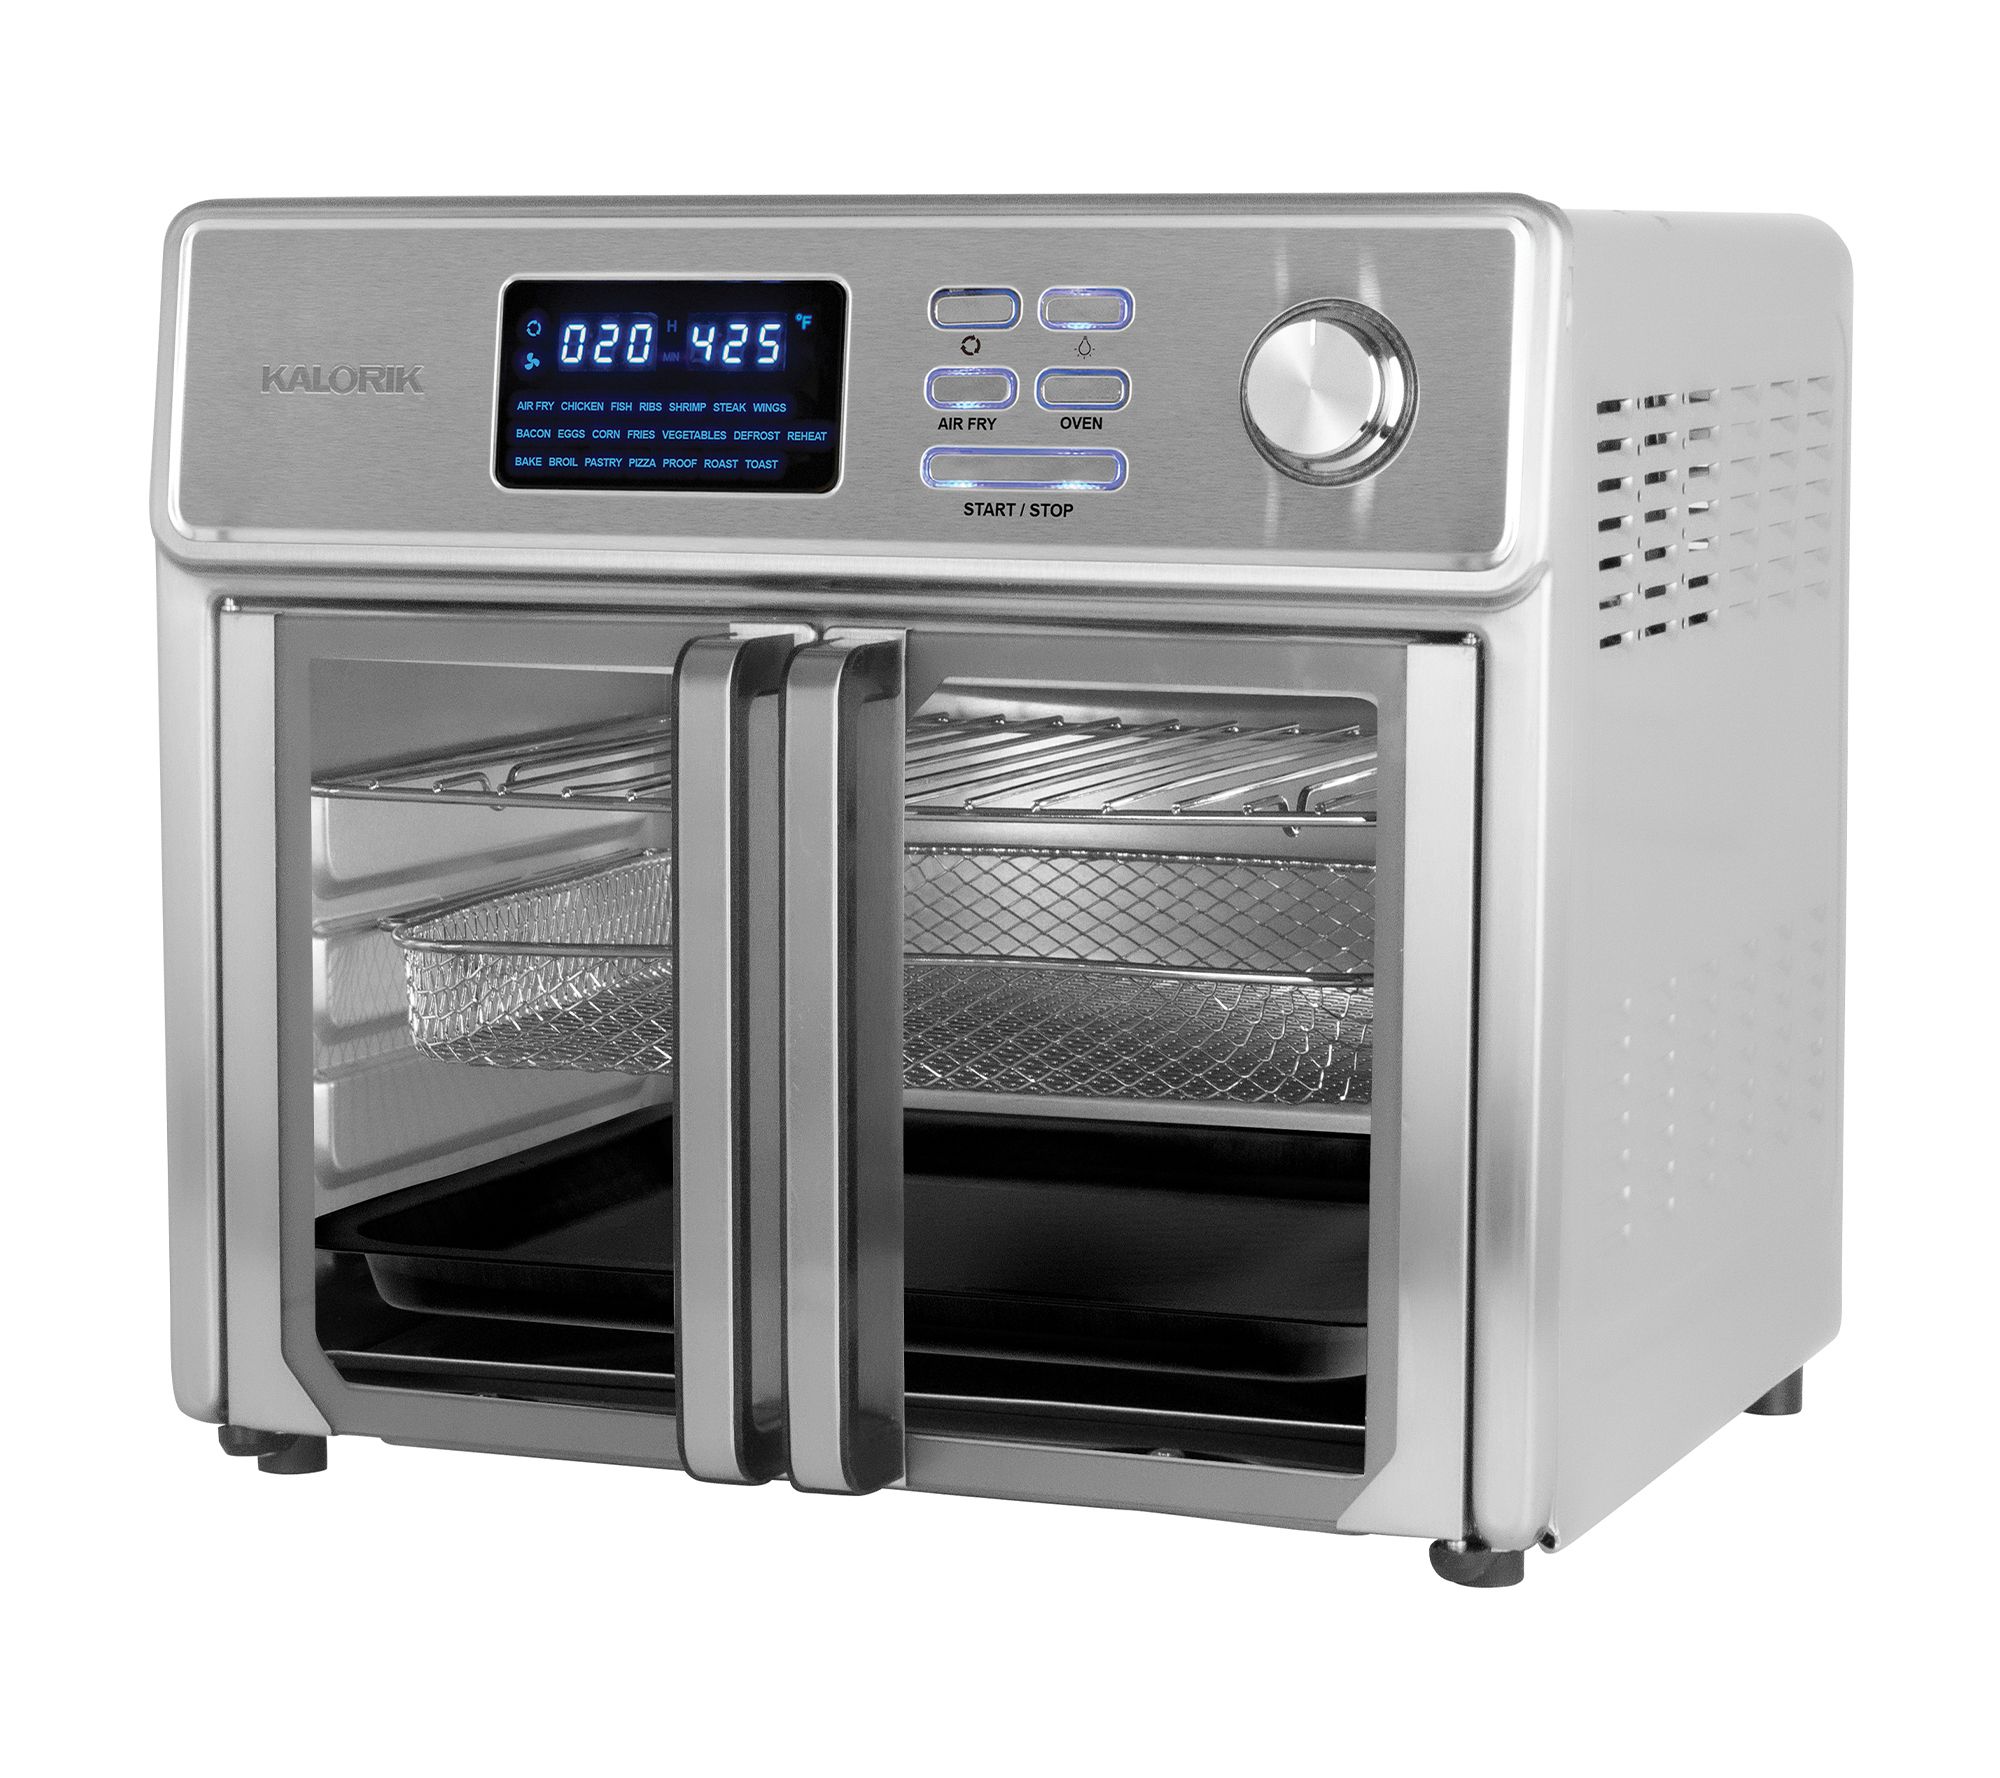 12L Mini Oven,Multi-Function Convection Countertop Toaster Oven Electric  Toaster Oven Toaster Ovens Countertop Aesthetic and Practical